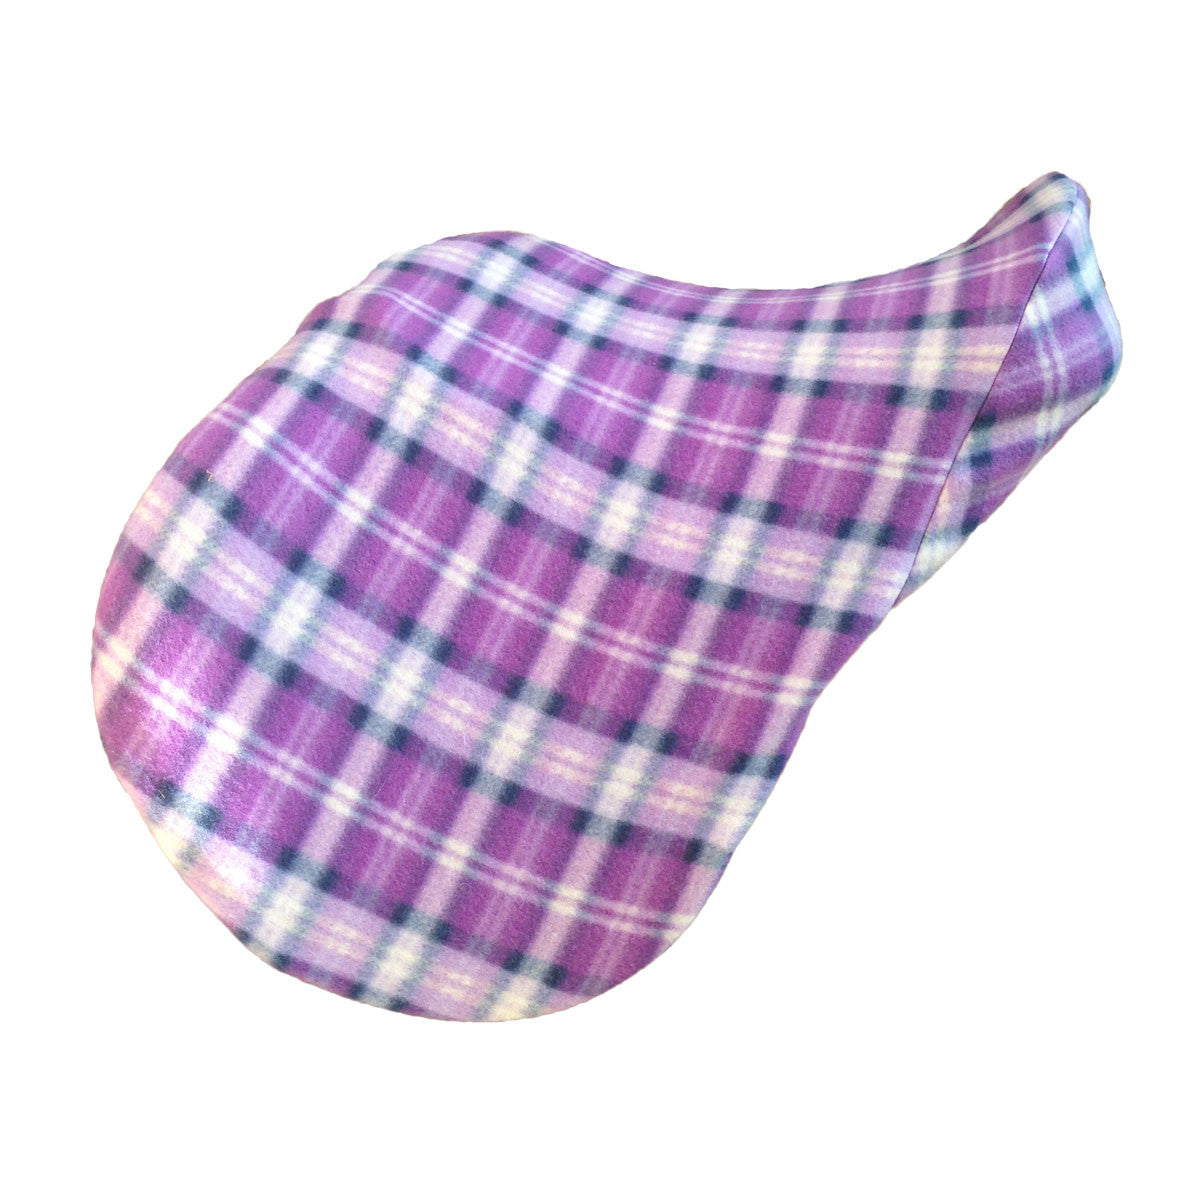 Plaid saddle cover by ZIKY